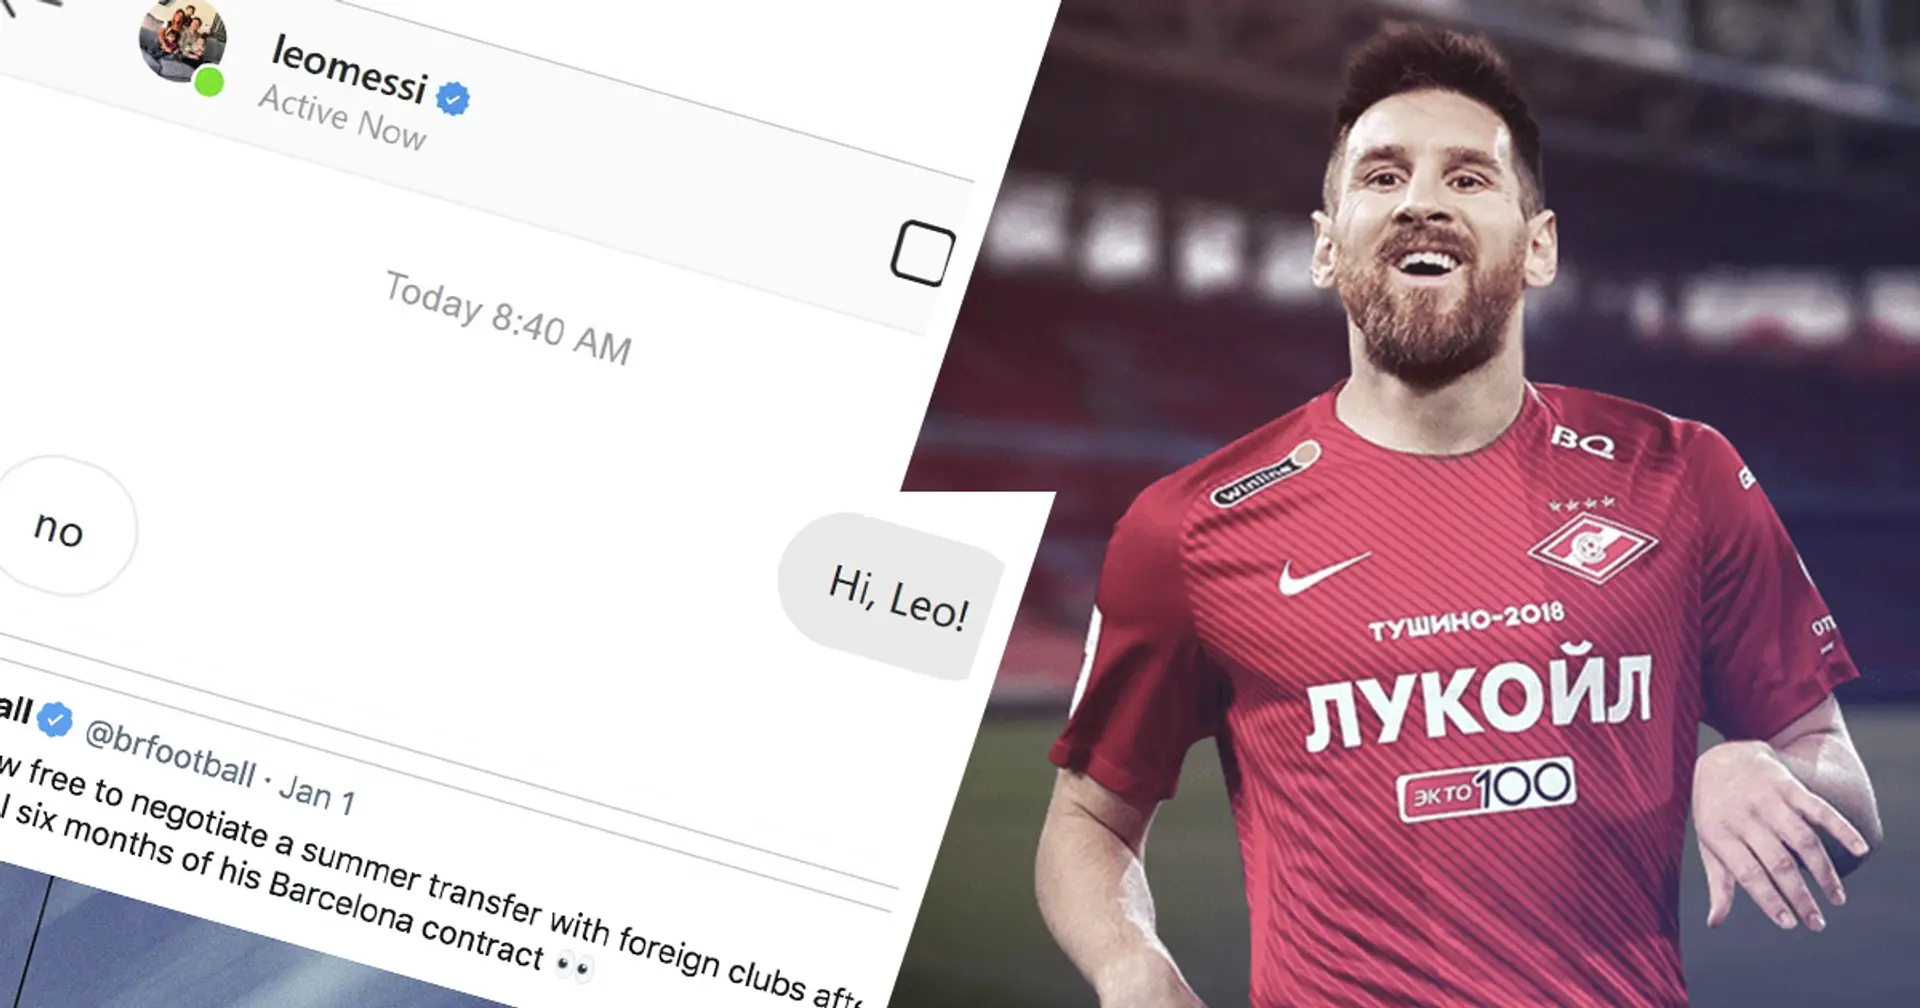 Russian side Spartak Moscow 'leak' Instagram chat with Messi as Argentine free to discuss future with other clubs